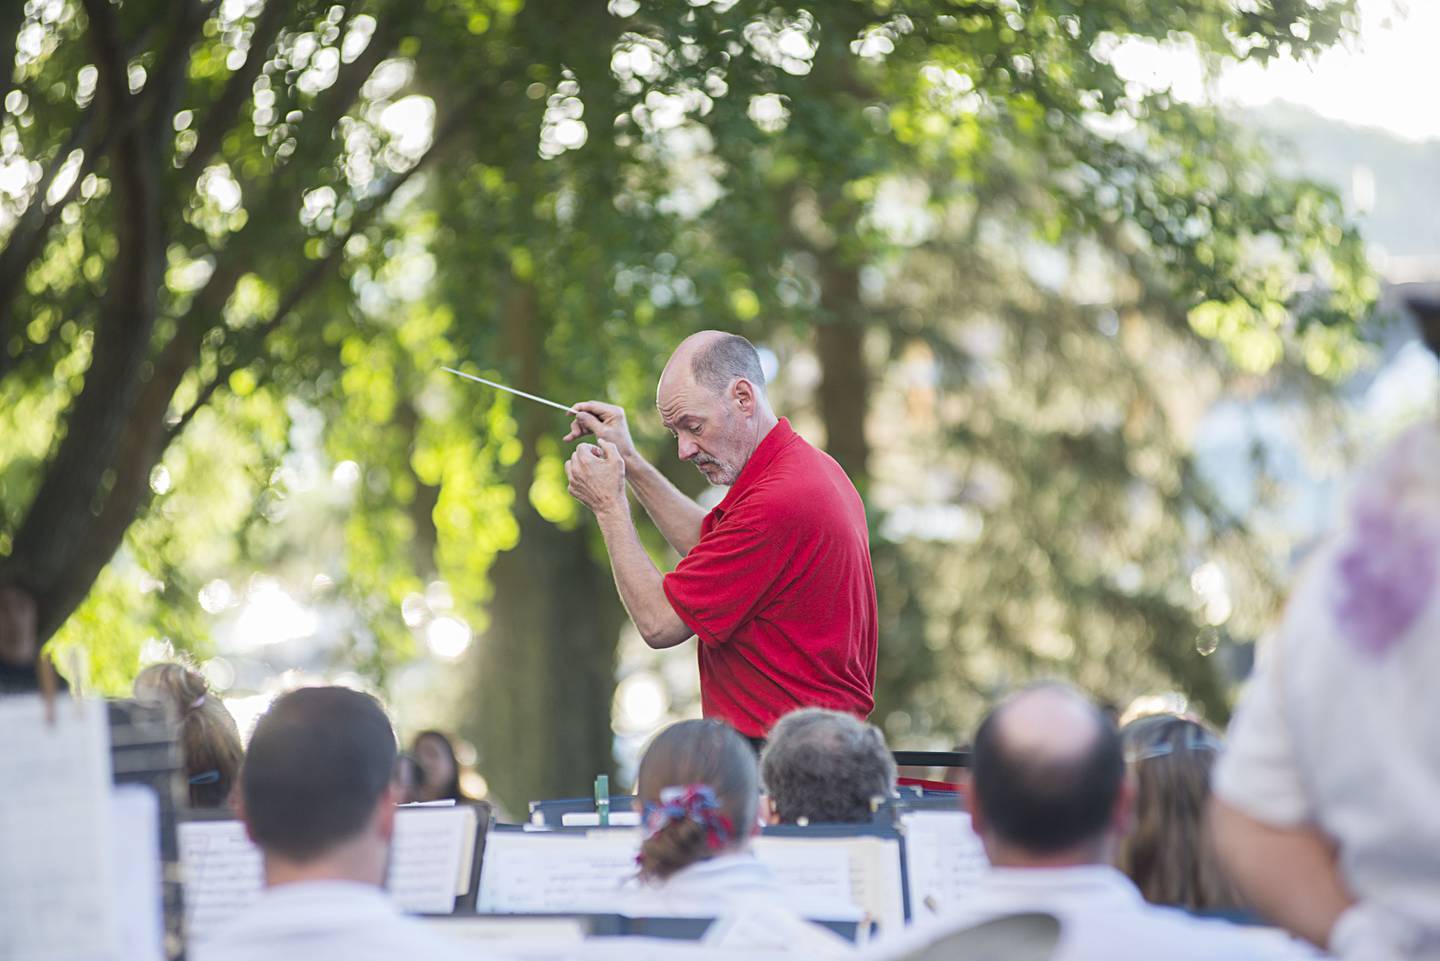 Dixon Municipal Band bandleader Jon James leads his band Friday, July 1, 2022 as they perform on the lawn of the Old Lee County Courthouse for their annual July 4 concert.  The lawn was packed as the band played an assortment of patriotic theme songs.